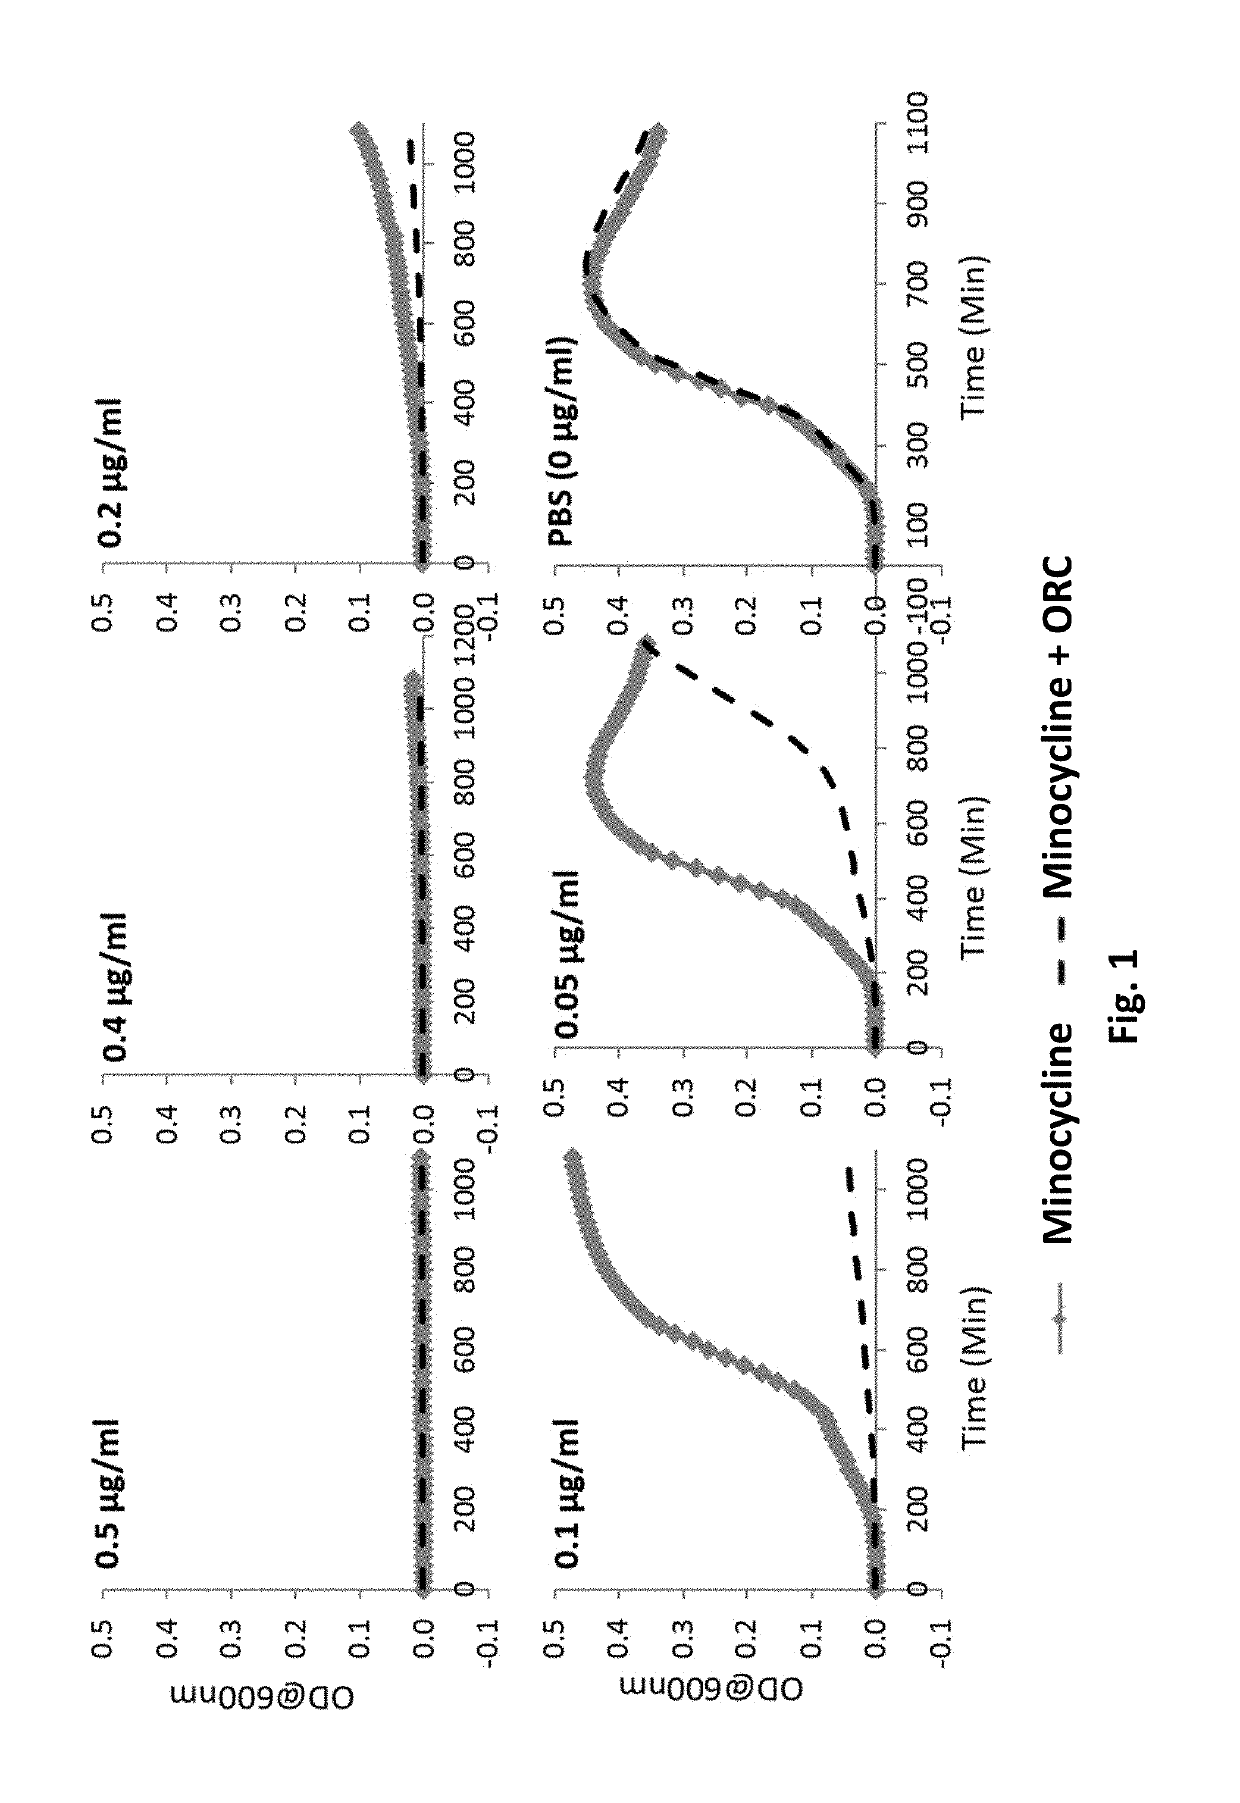 Antimicrobial compositions comprising minocycline and oxidized cellulose